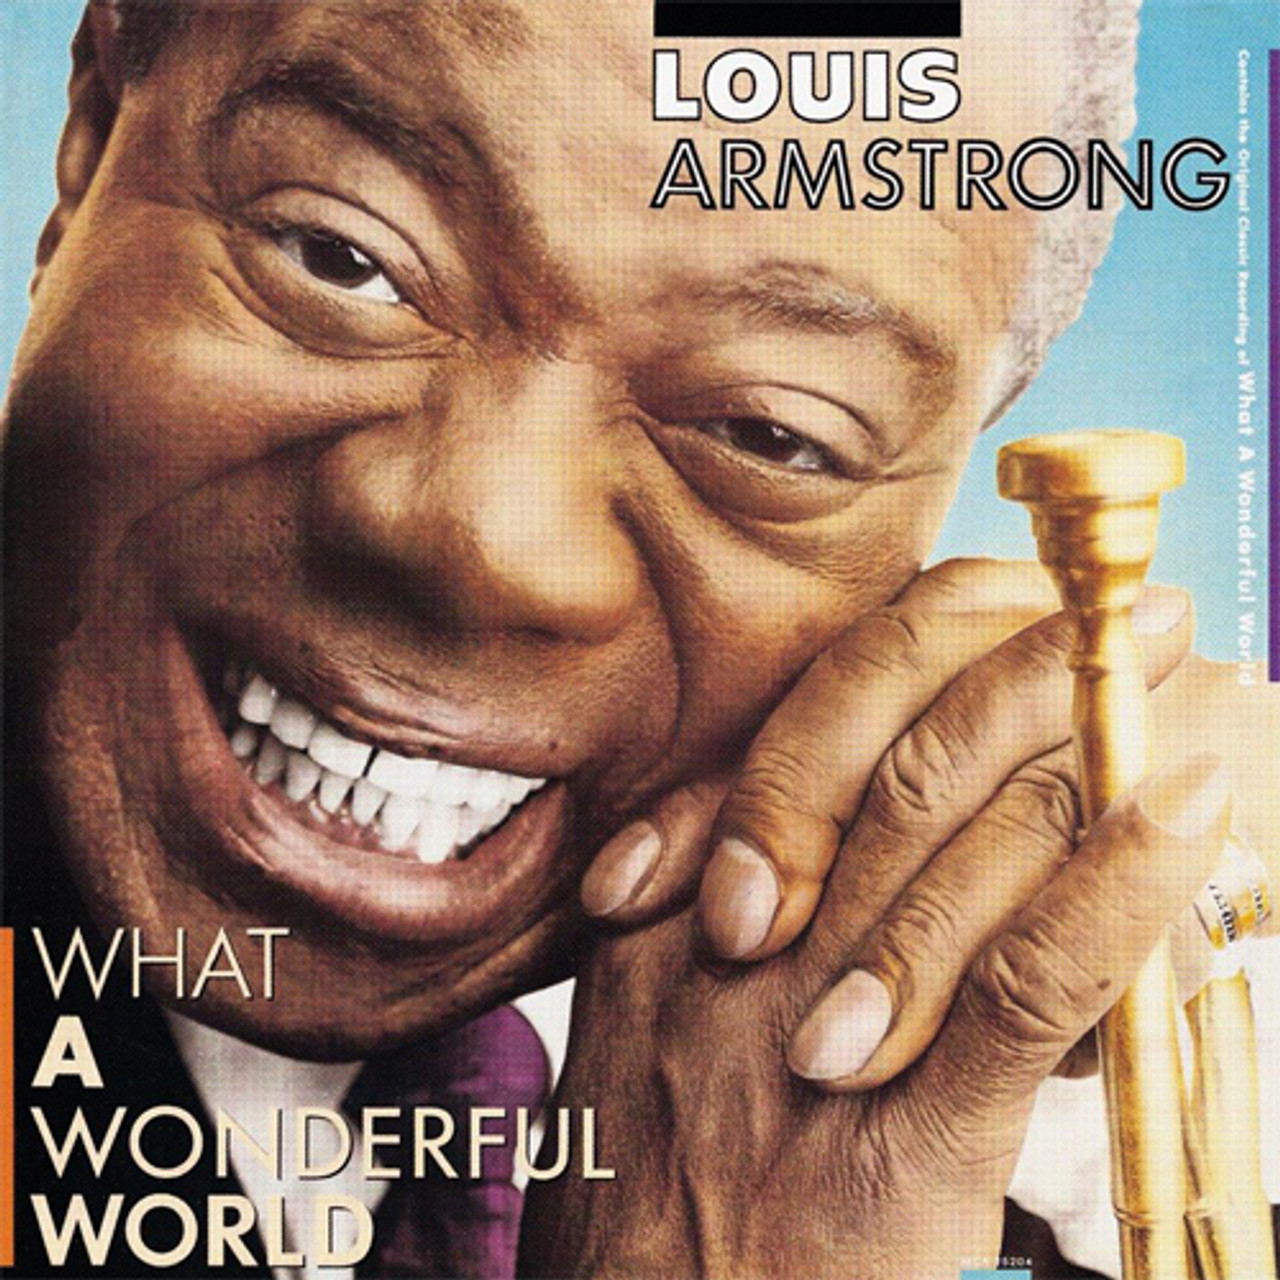 Louis Armstrong - 1926 - 1968 The Essential Works